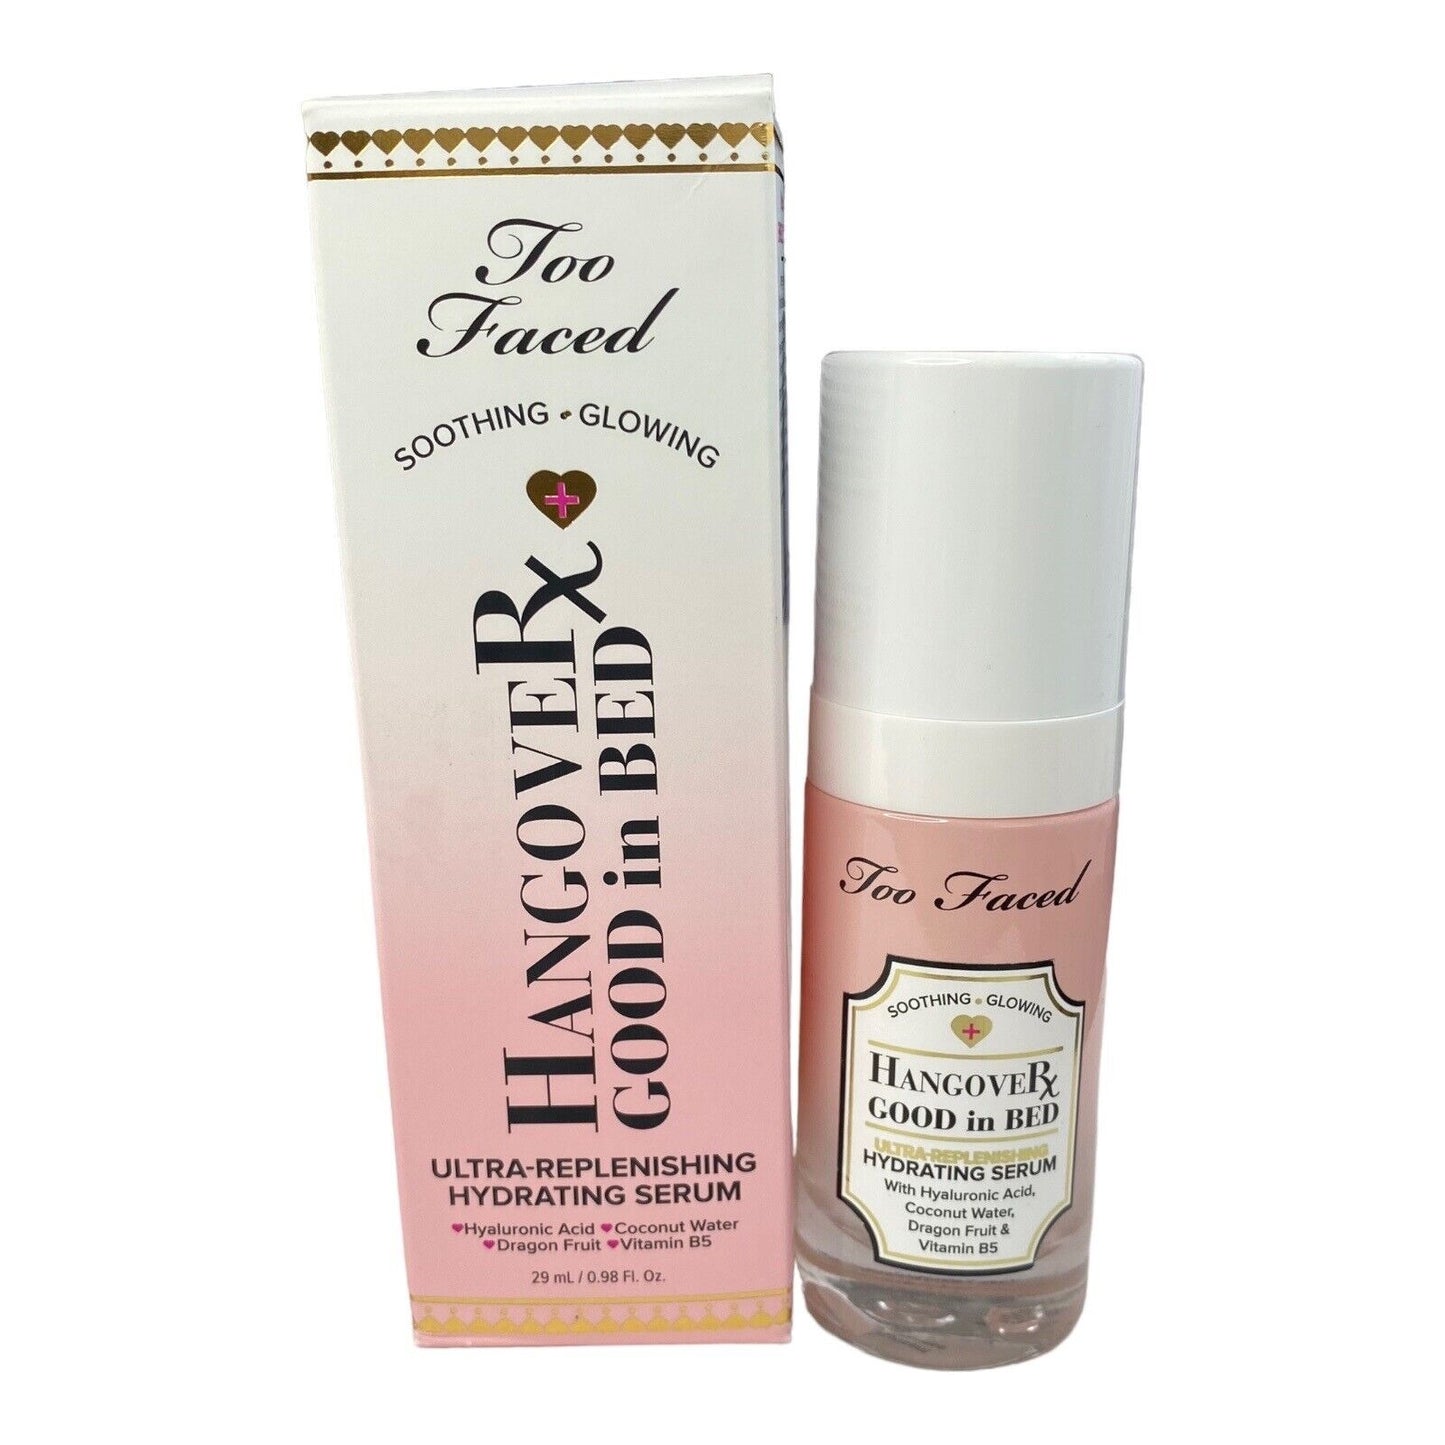 Too Faced Hangover Good in Bed Ultra-Replenishing Hydrating Serum